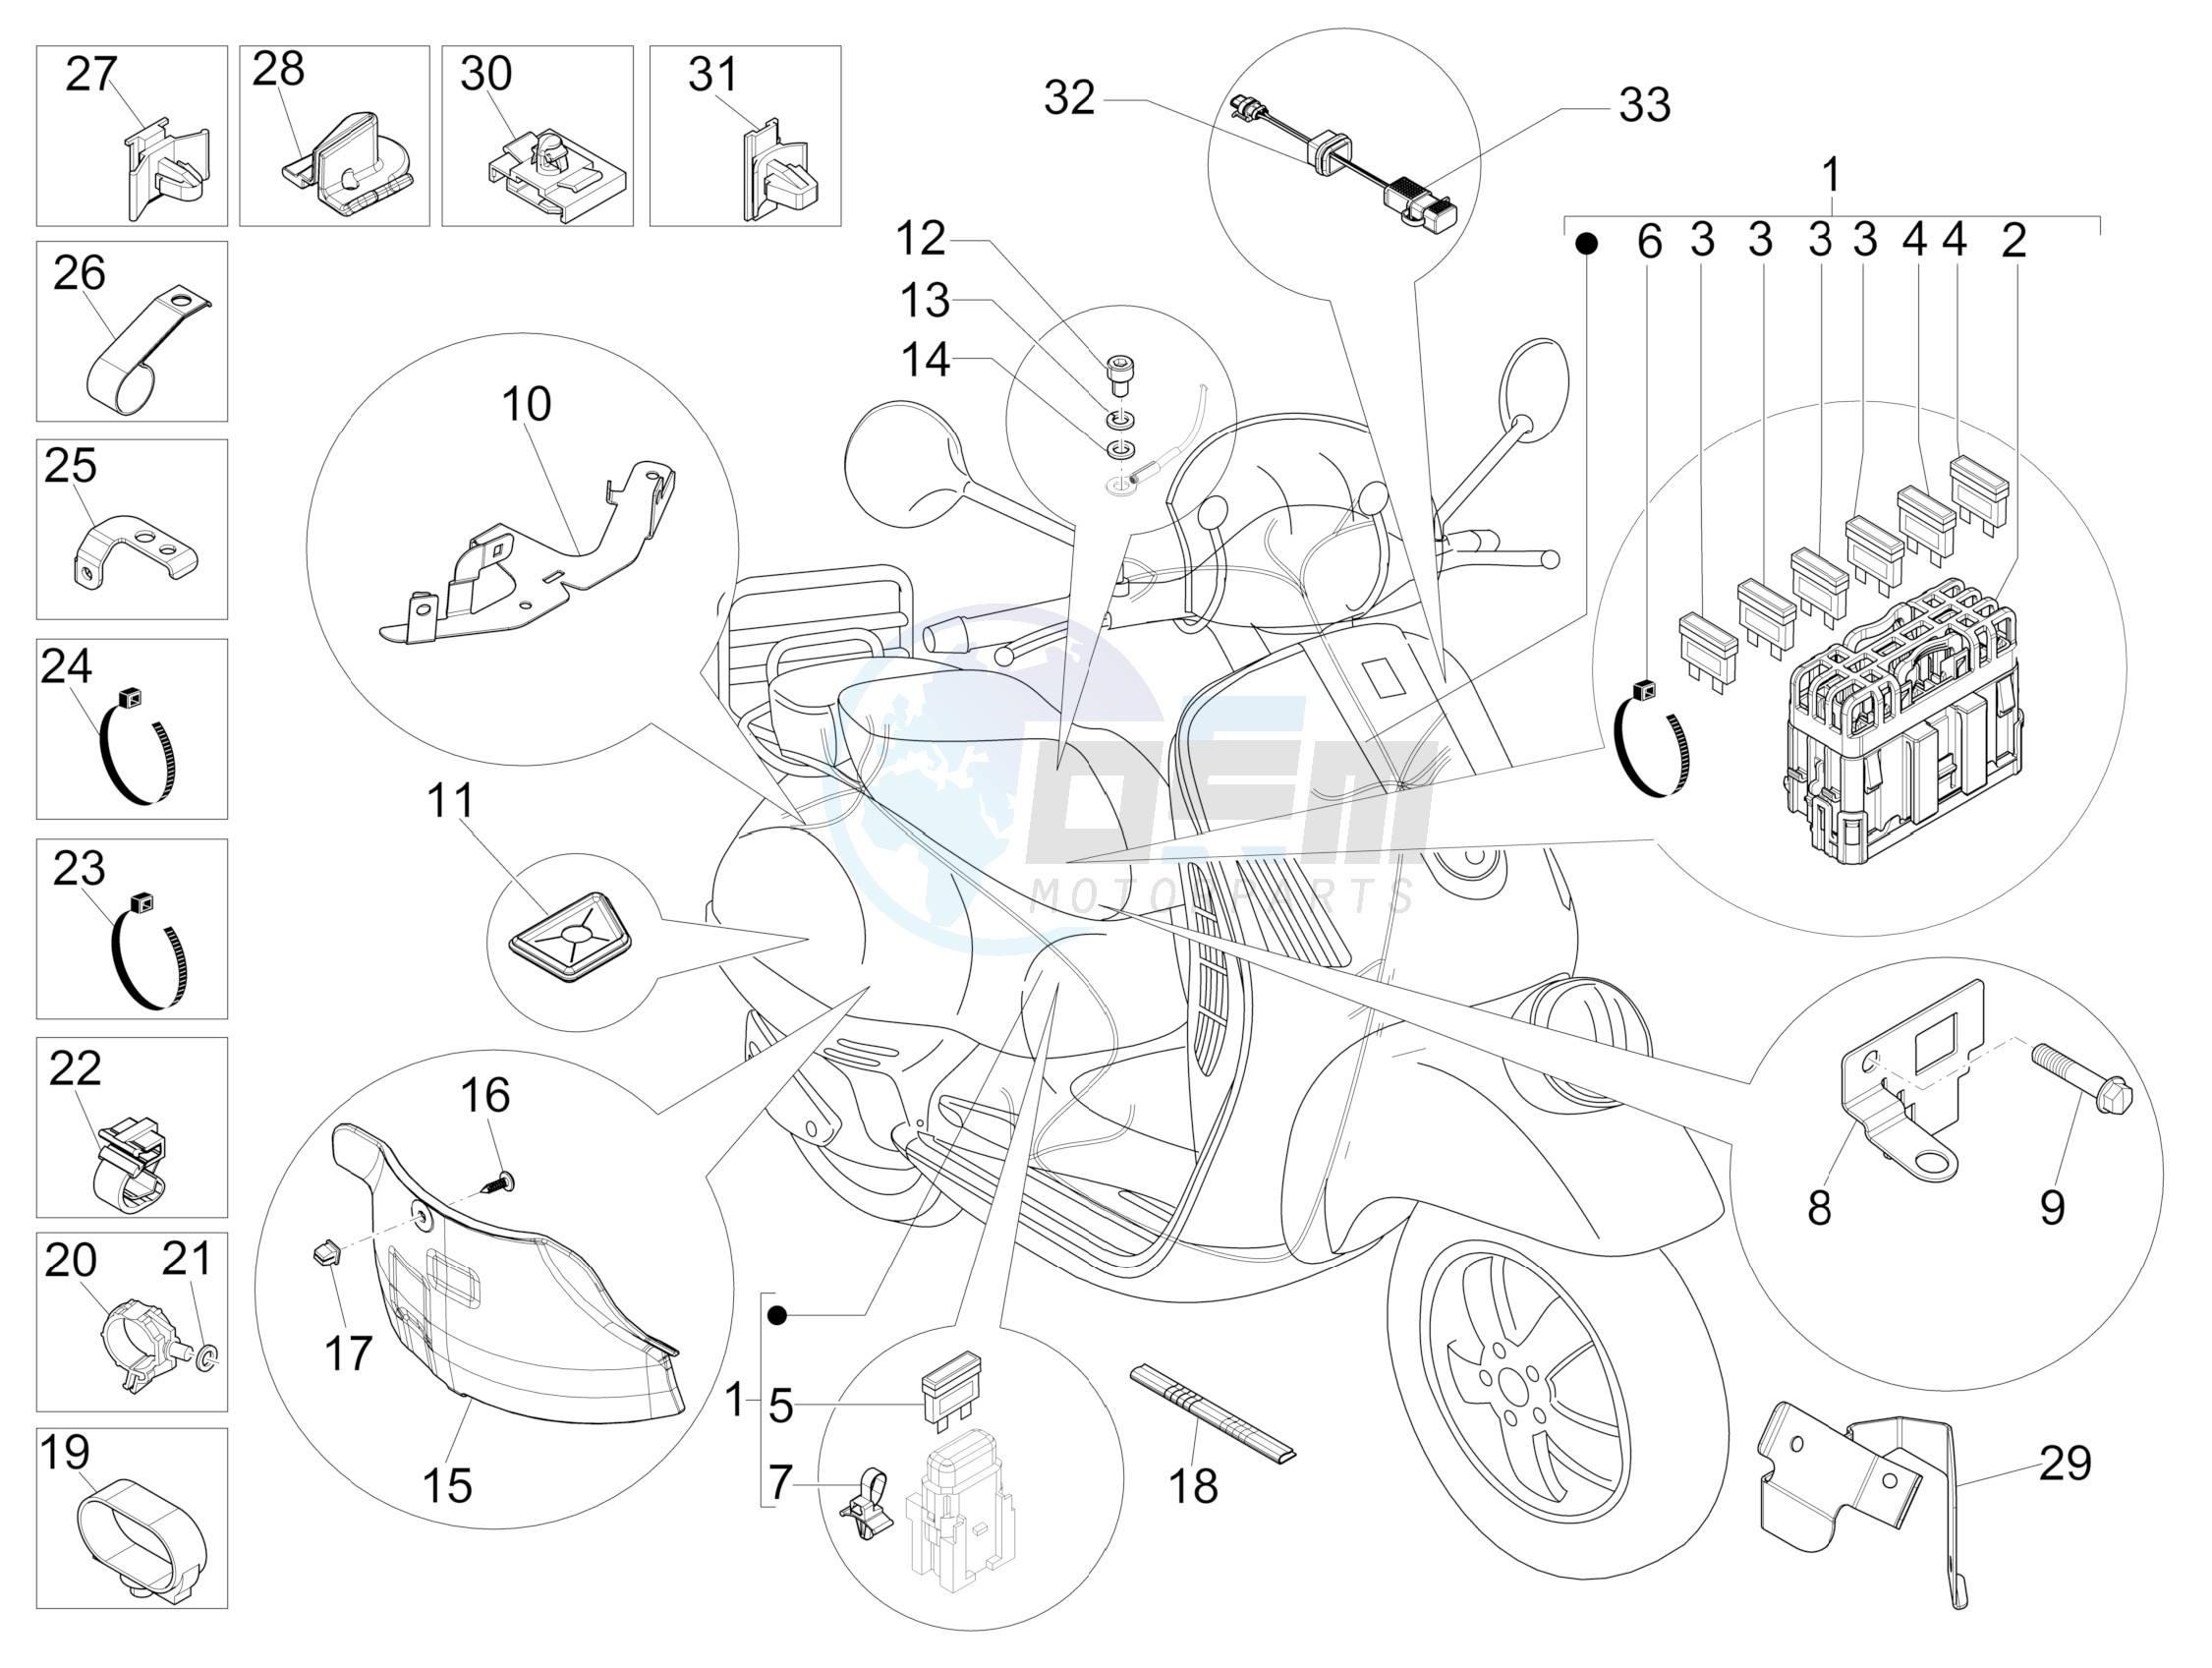 Main cable harness blueprint